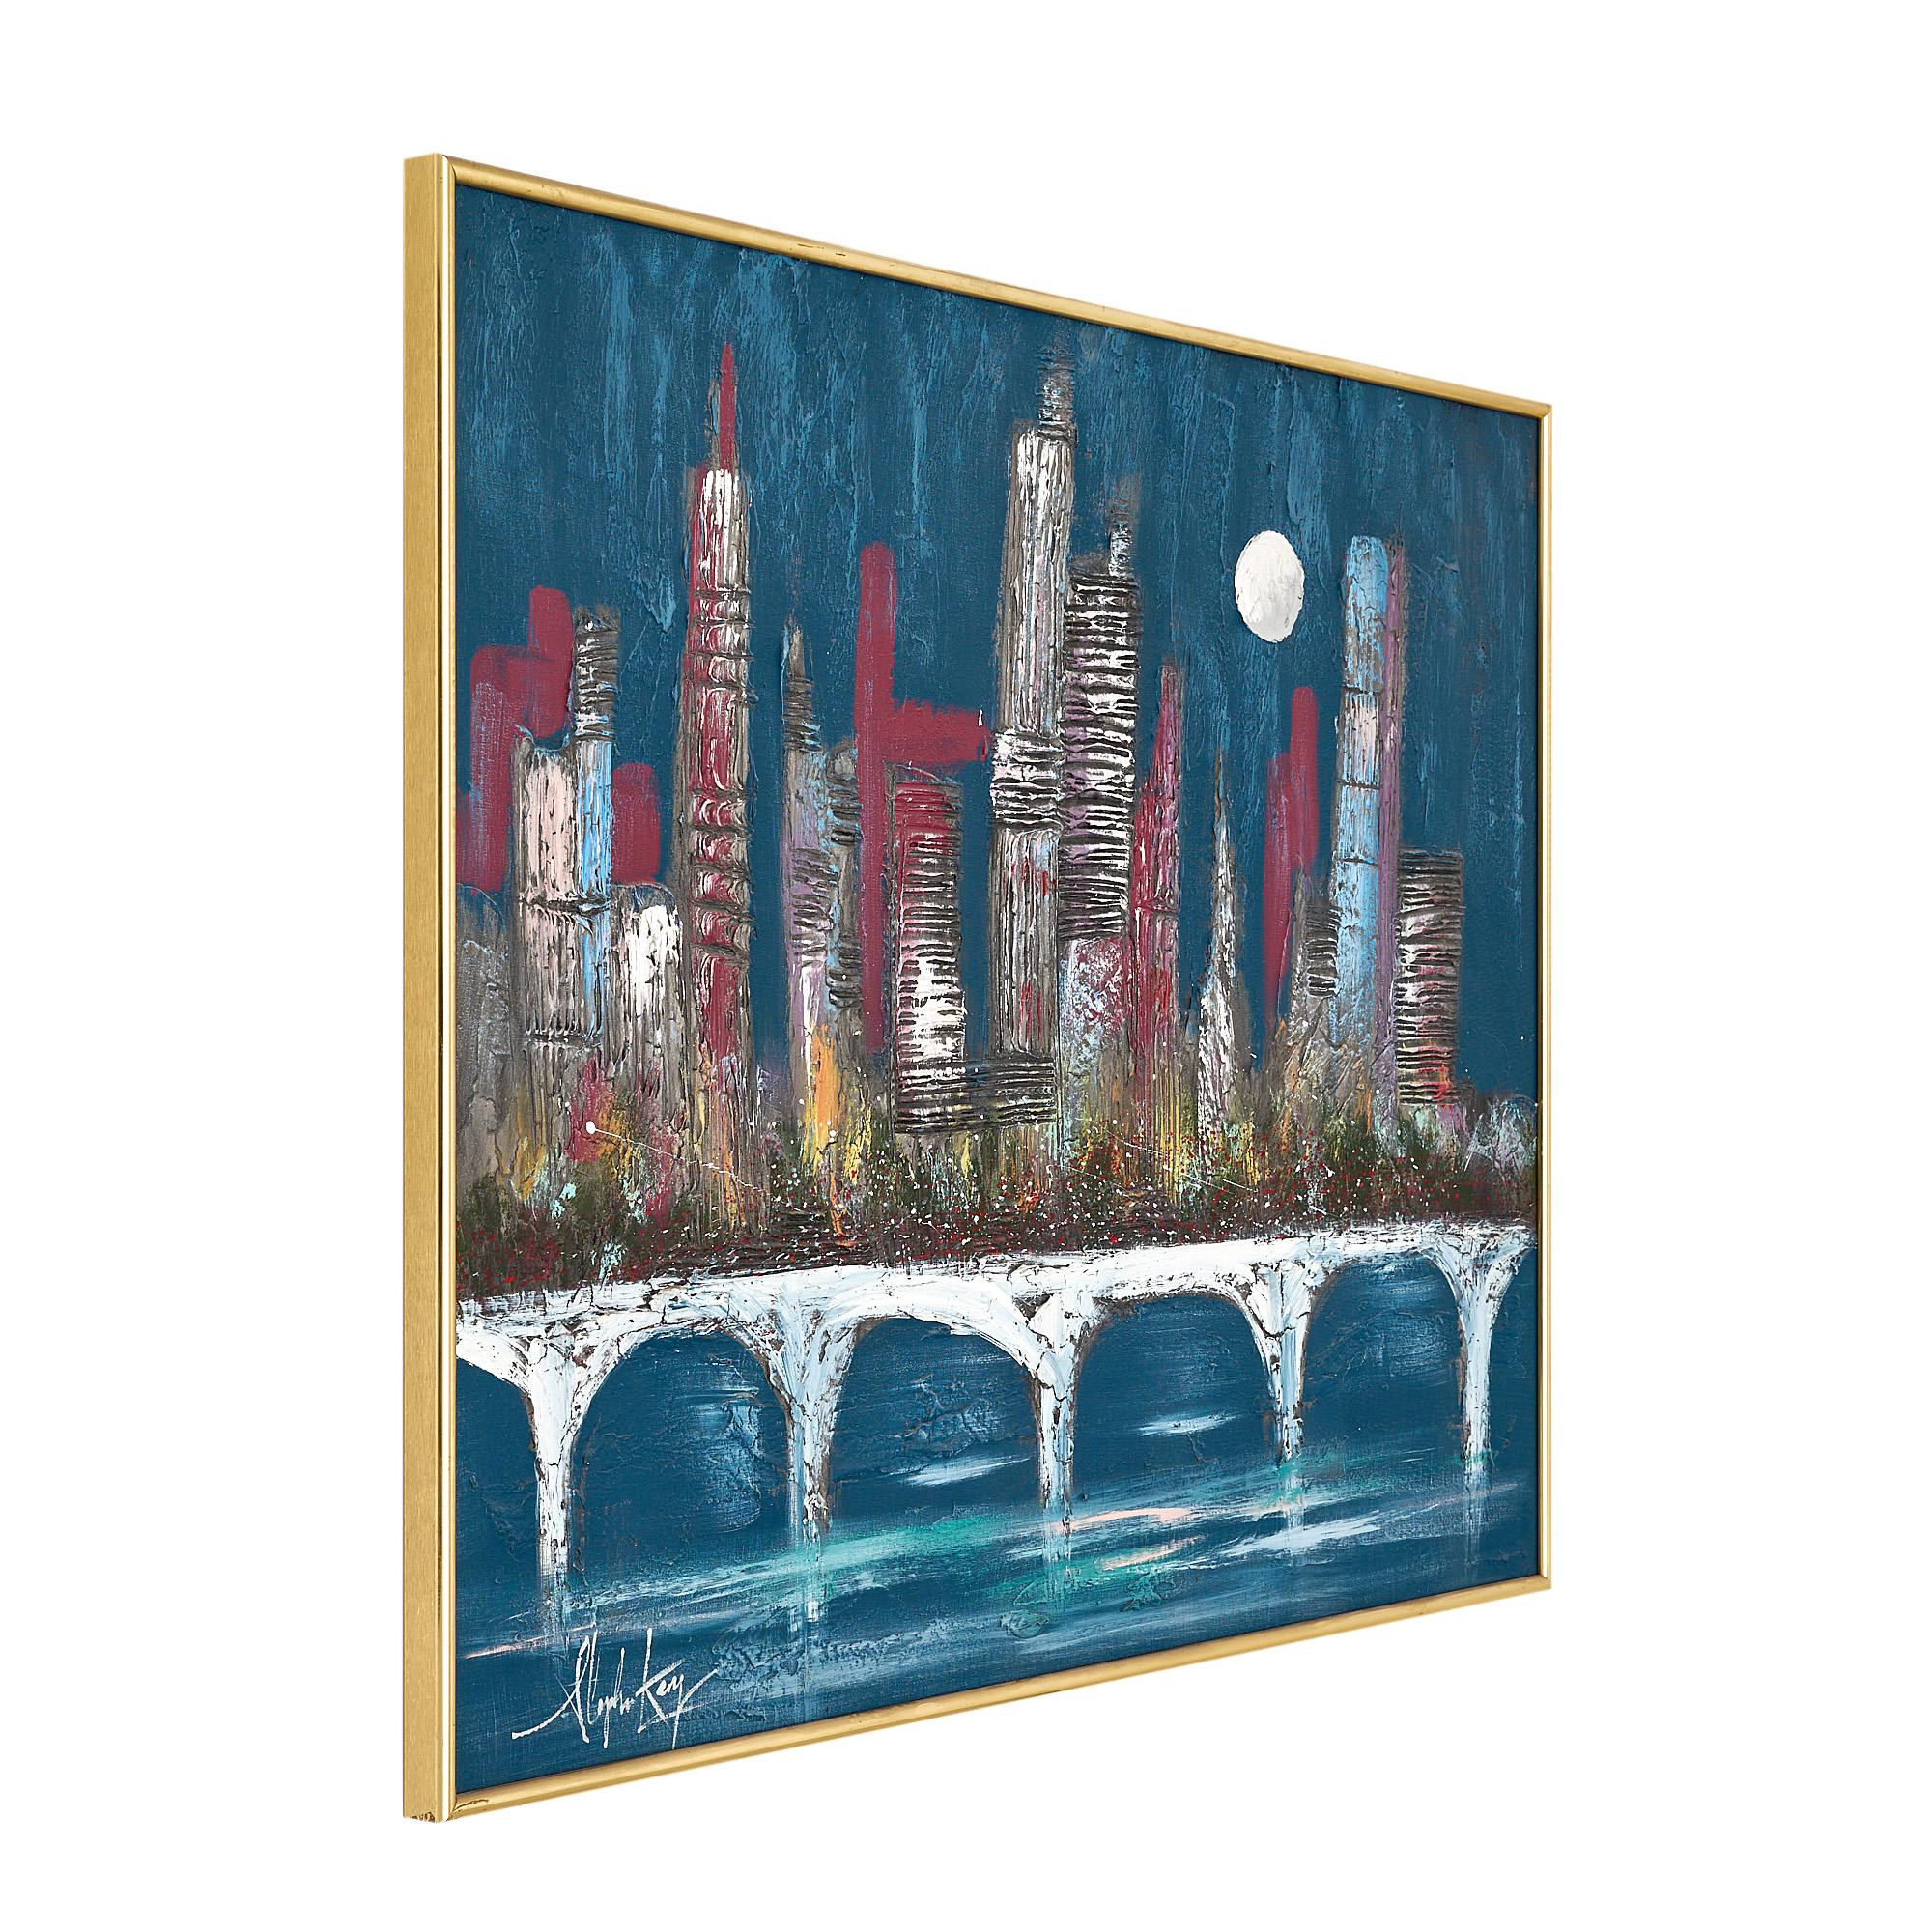 Oil painting, signed and featuring a downtown cityscape. This piece is multi media on canvas with a gold frame.